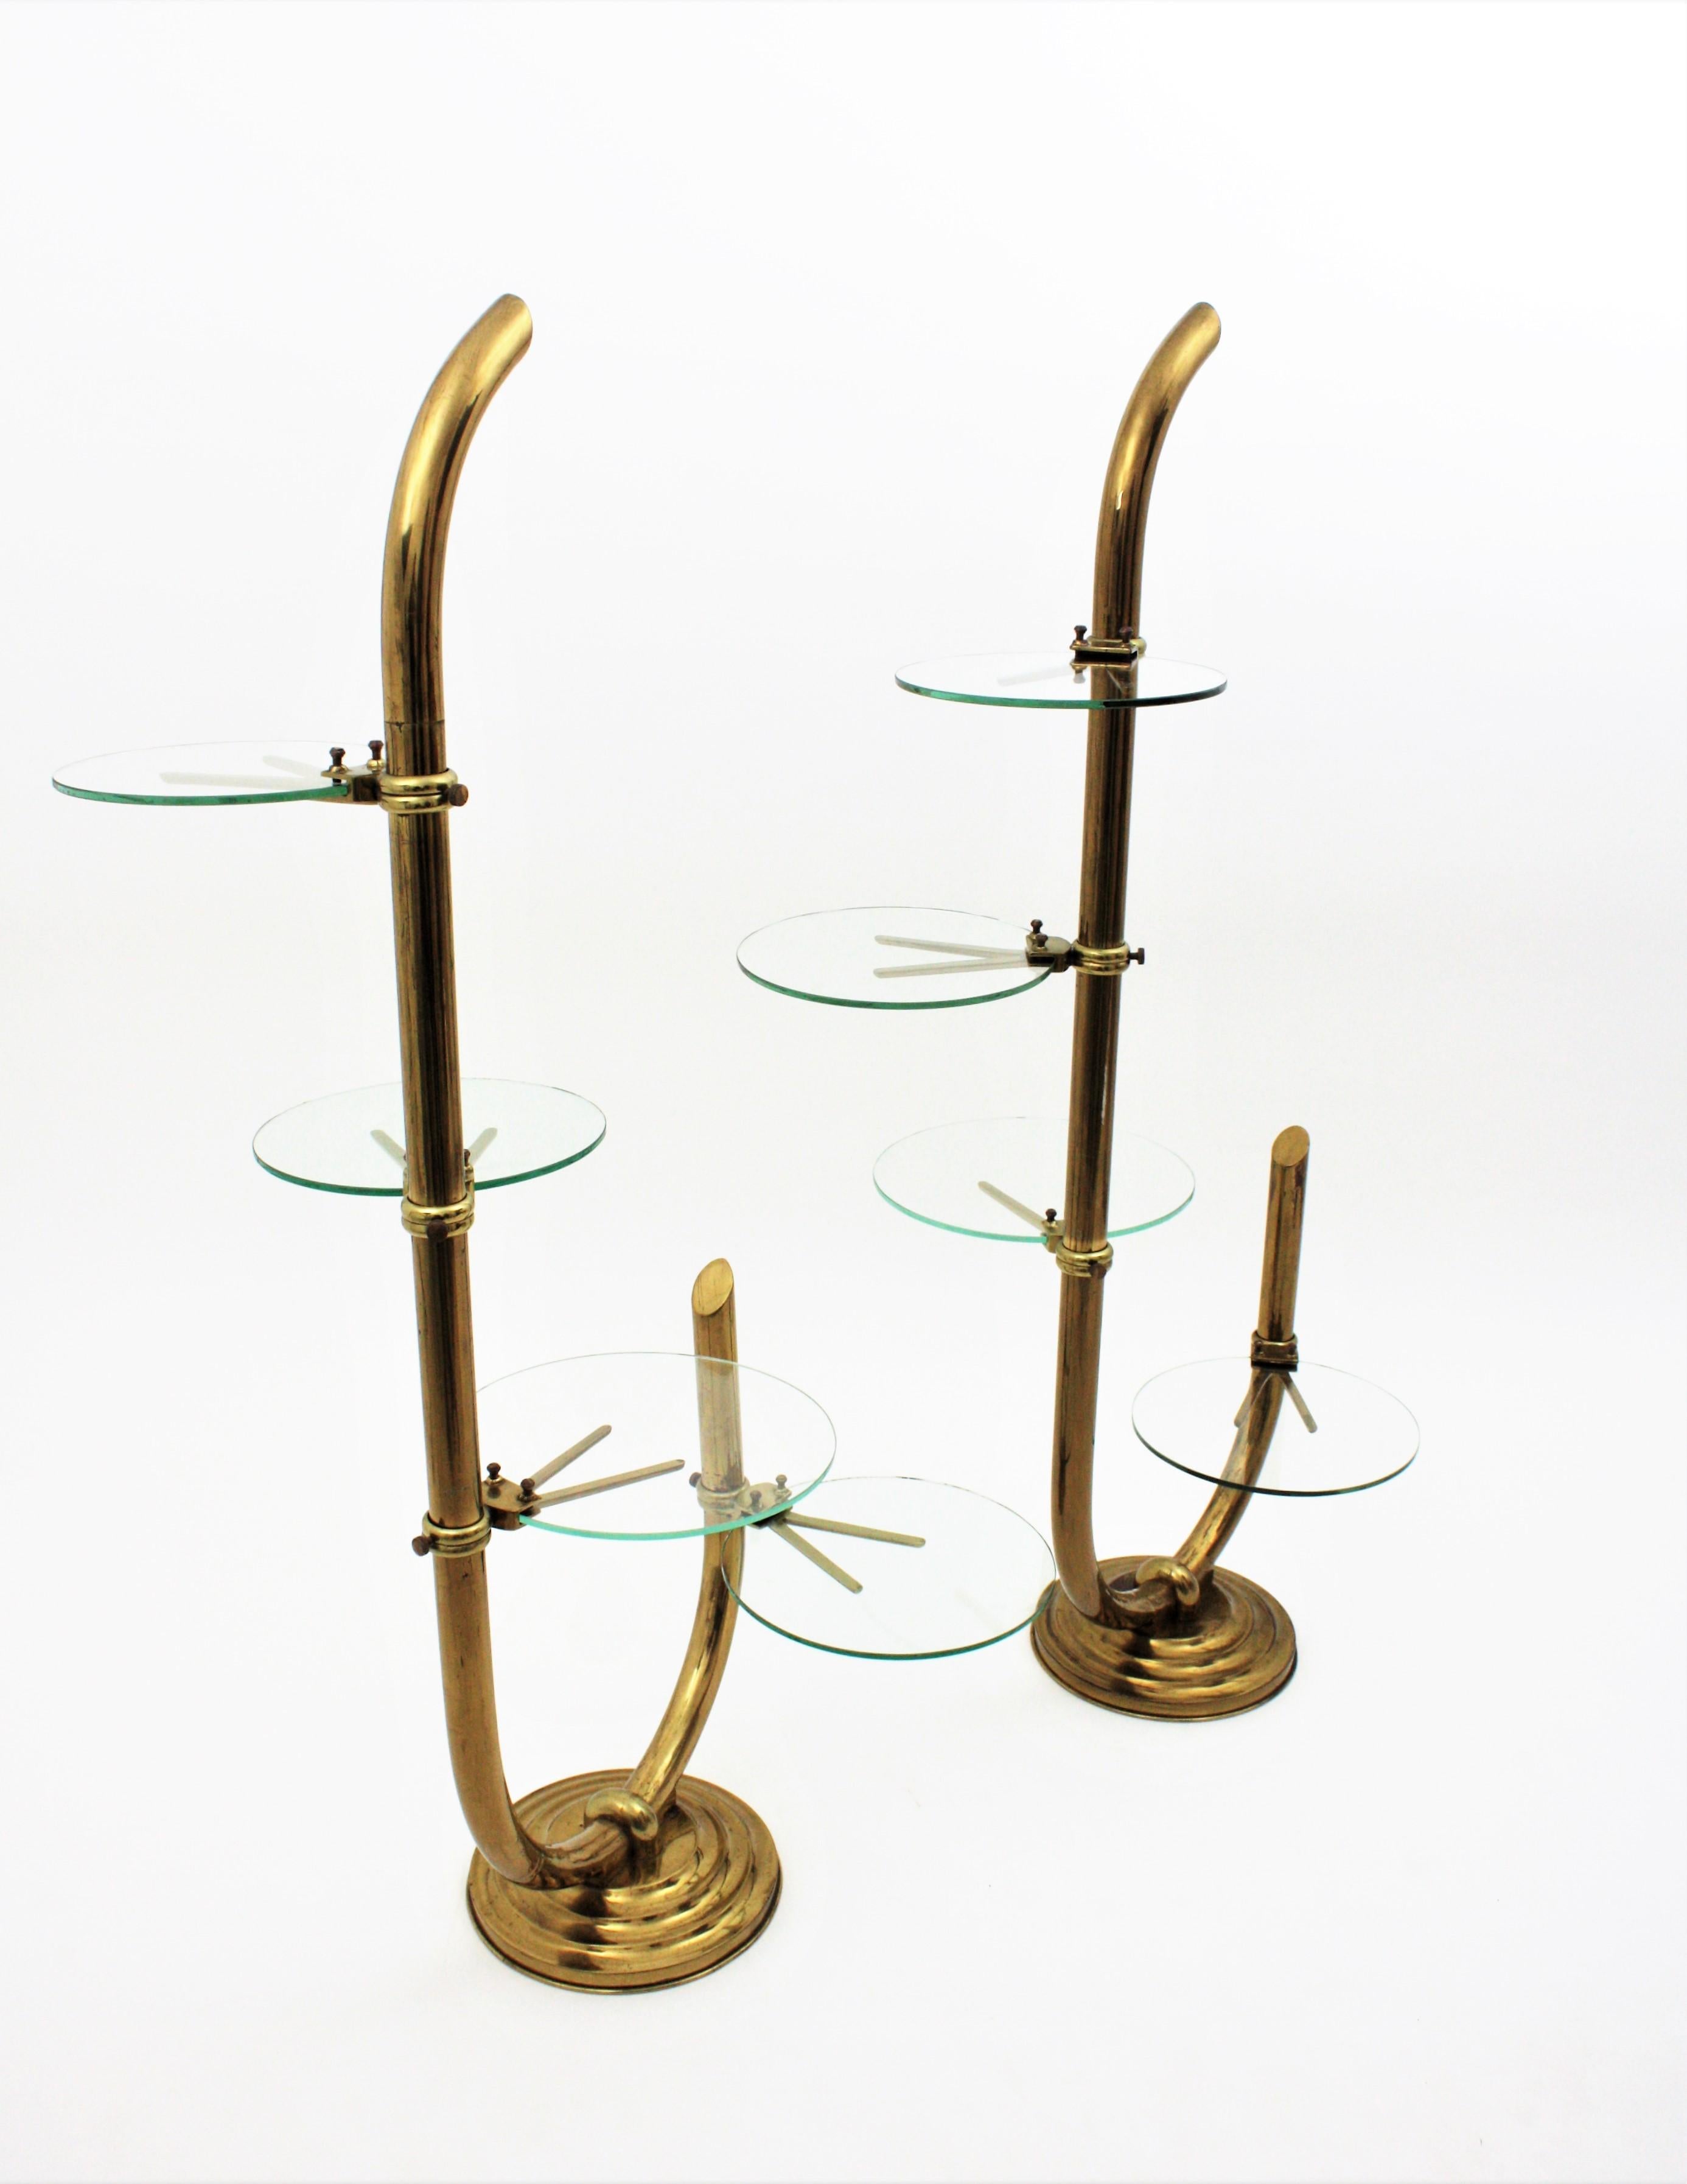 Art Deco Brass Floor Shop Display Stands / Swivel Etageres with Shelves in Glass 7